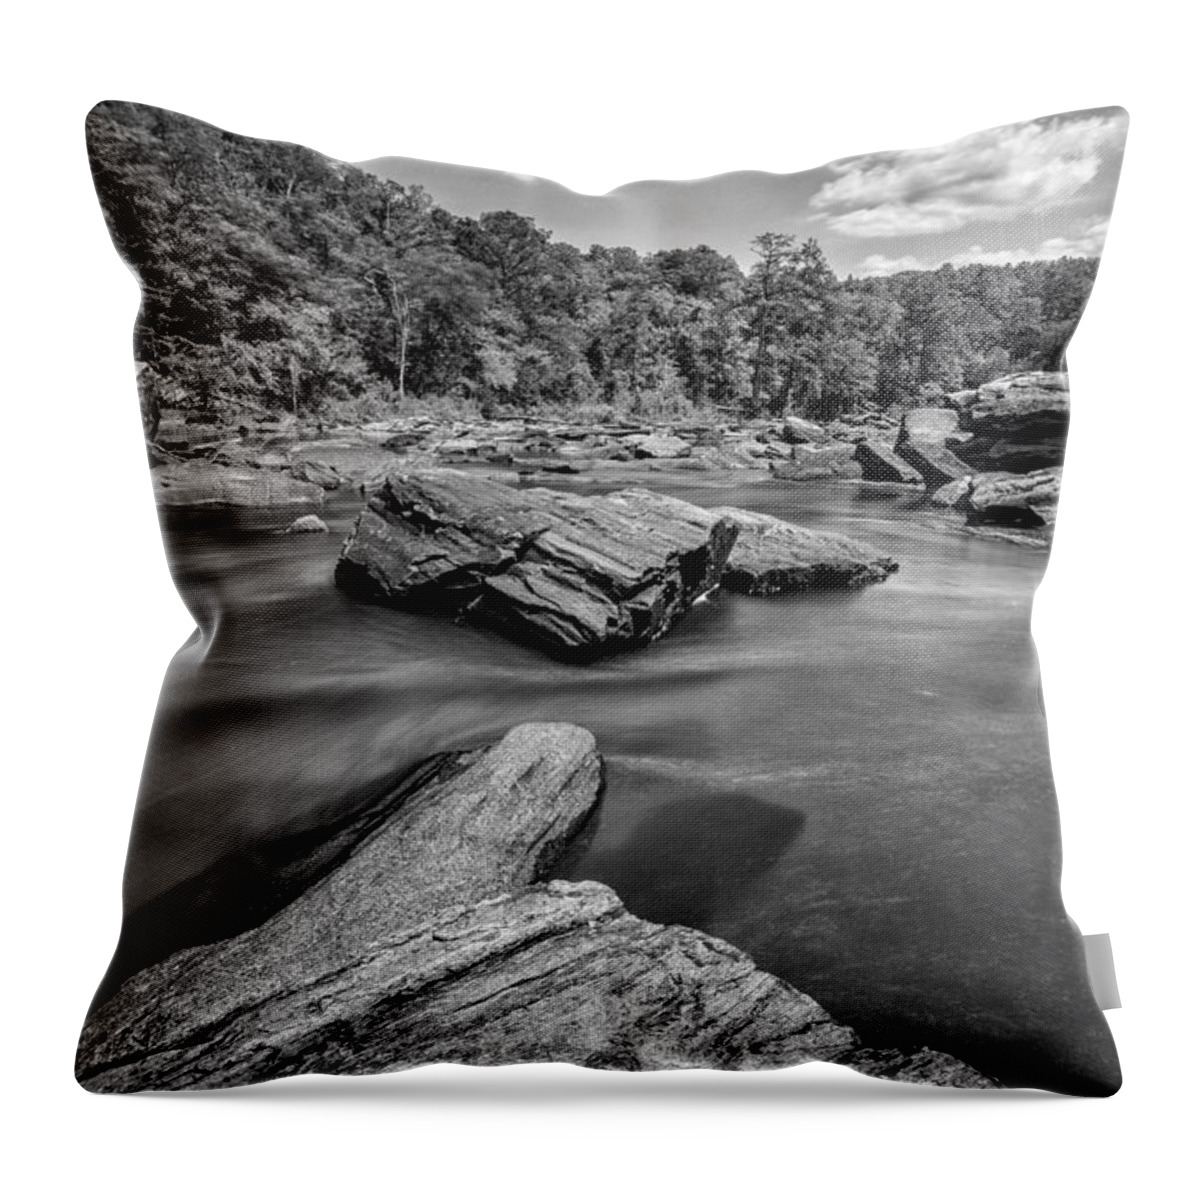 Sweetwater-creek Throw Pillow featuring the photograph Sweetwater Creek II by Bernd Laeschke